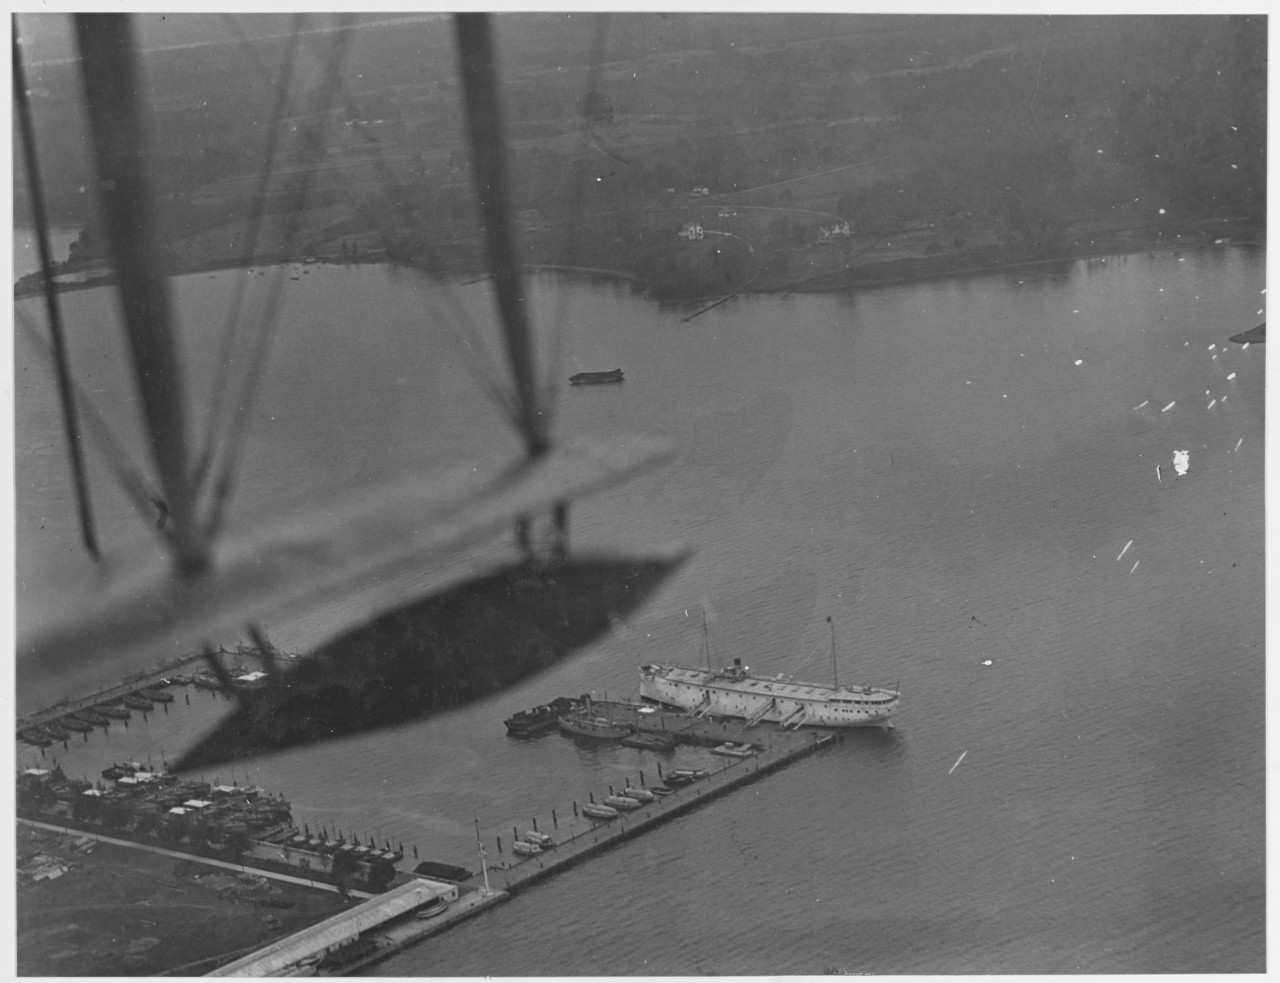 Aerial view near Naval Academy, Annapolis, Maryland. June 22, 1921